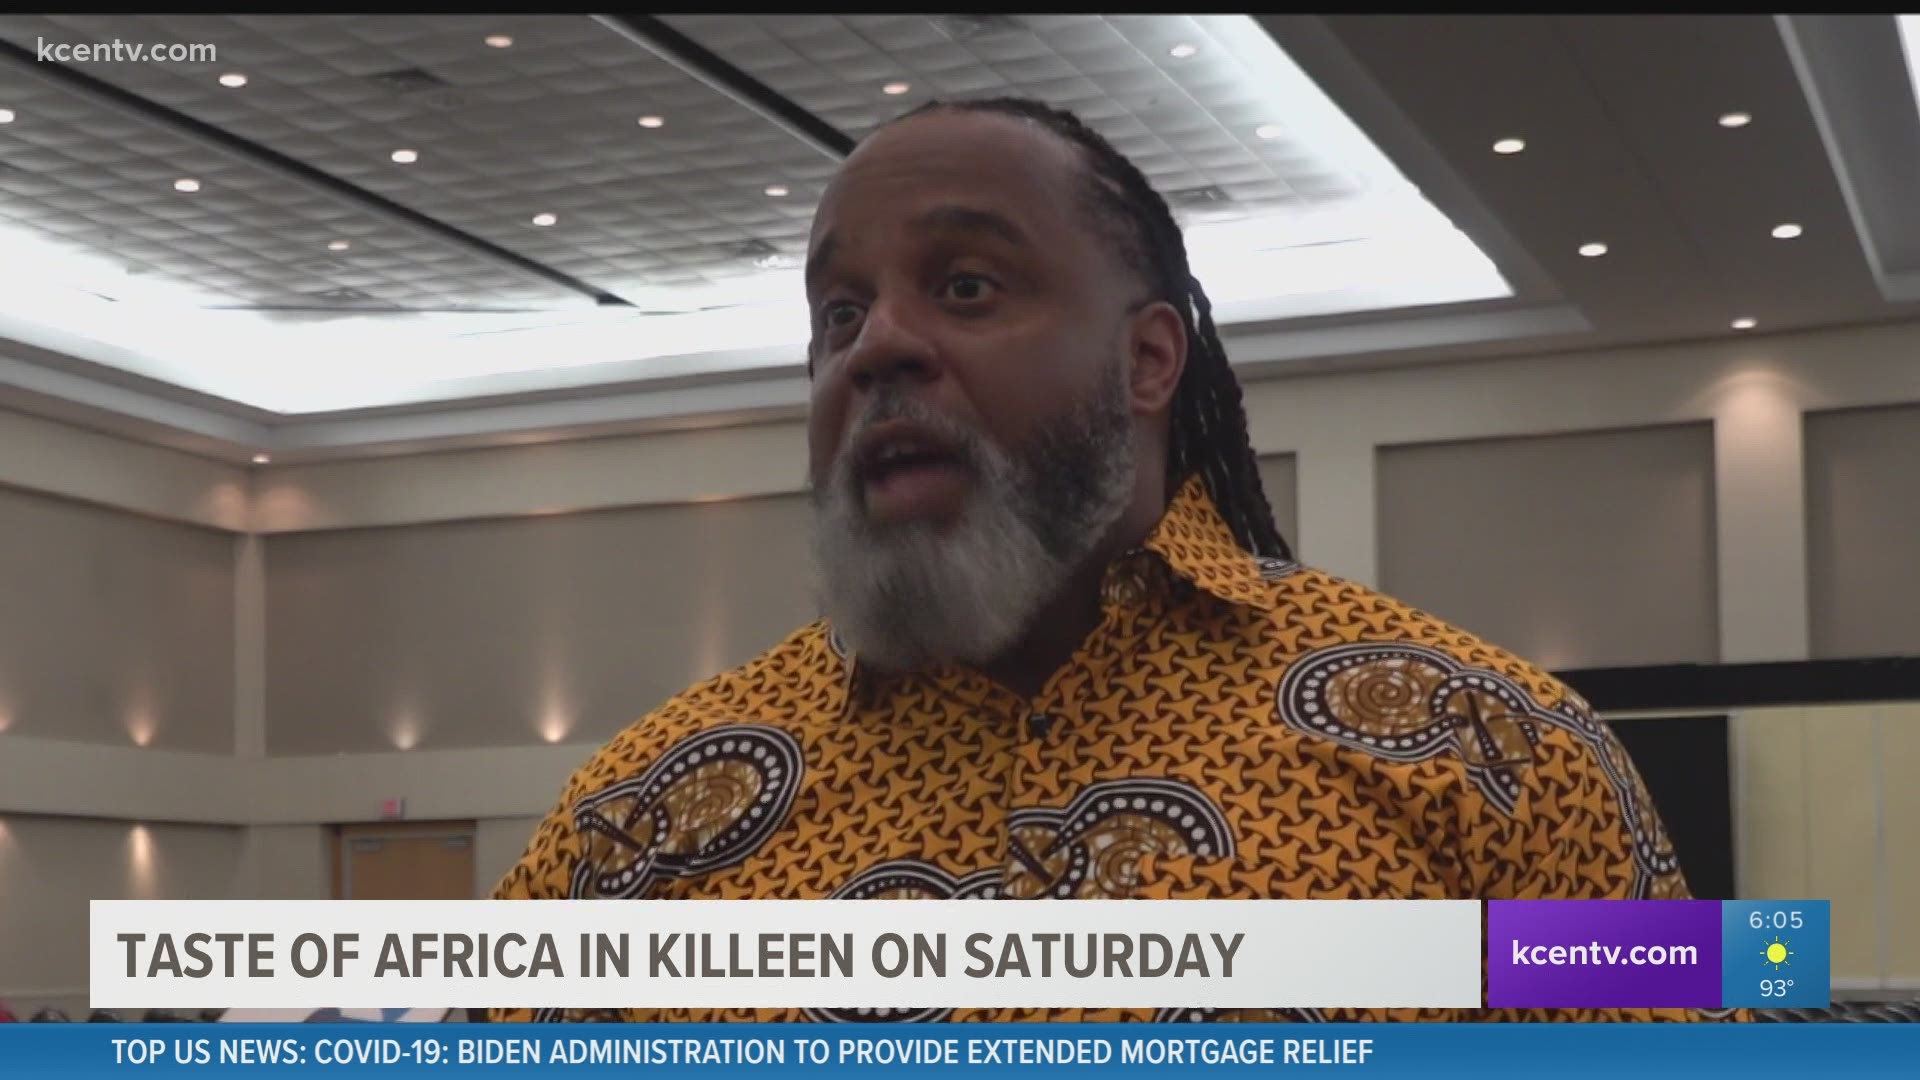 The traditions of African Art, music and culture are making their way to Killeen Saturday during the "Taste of Africa" event.